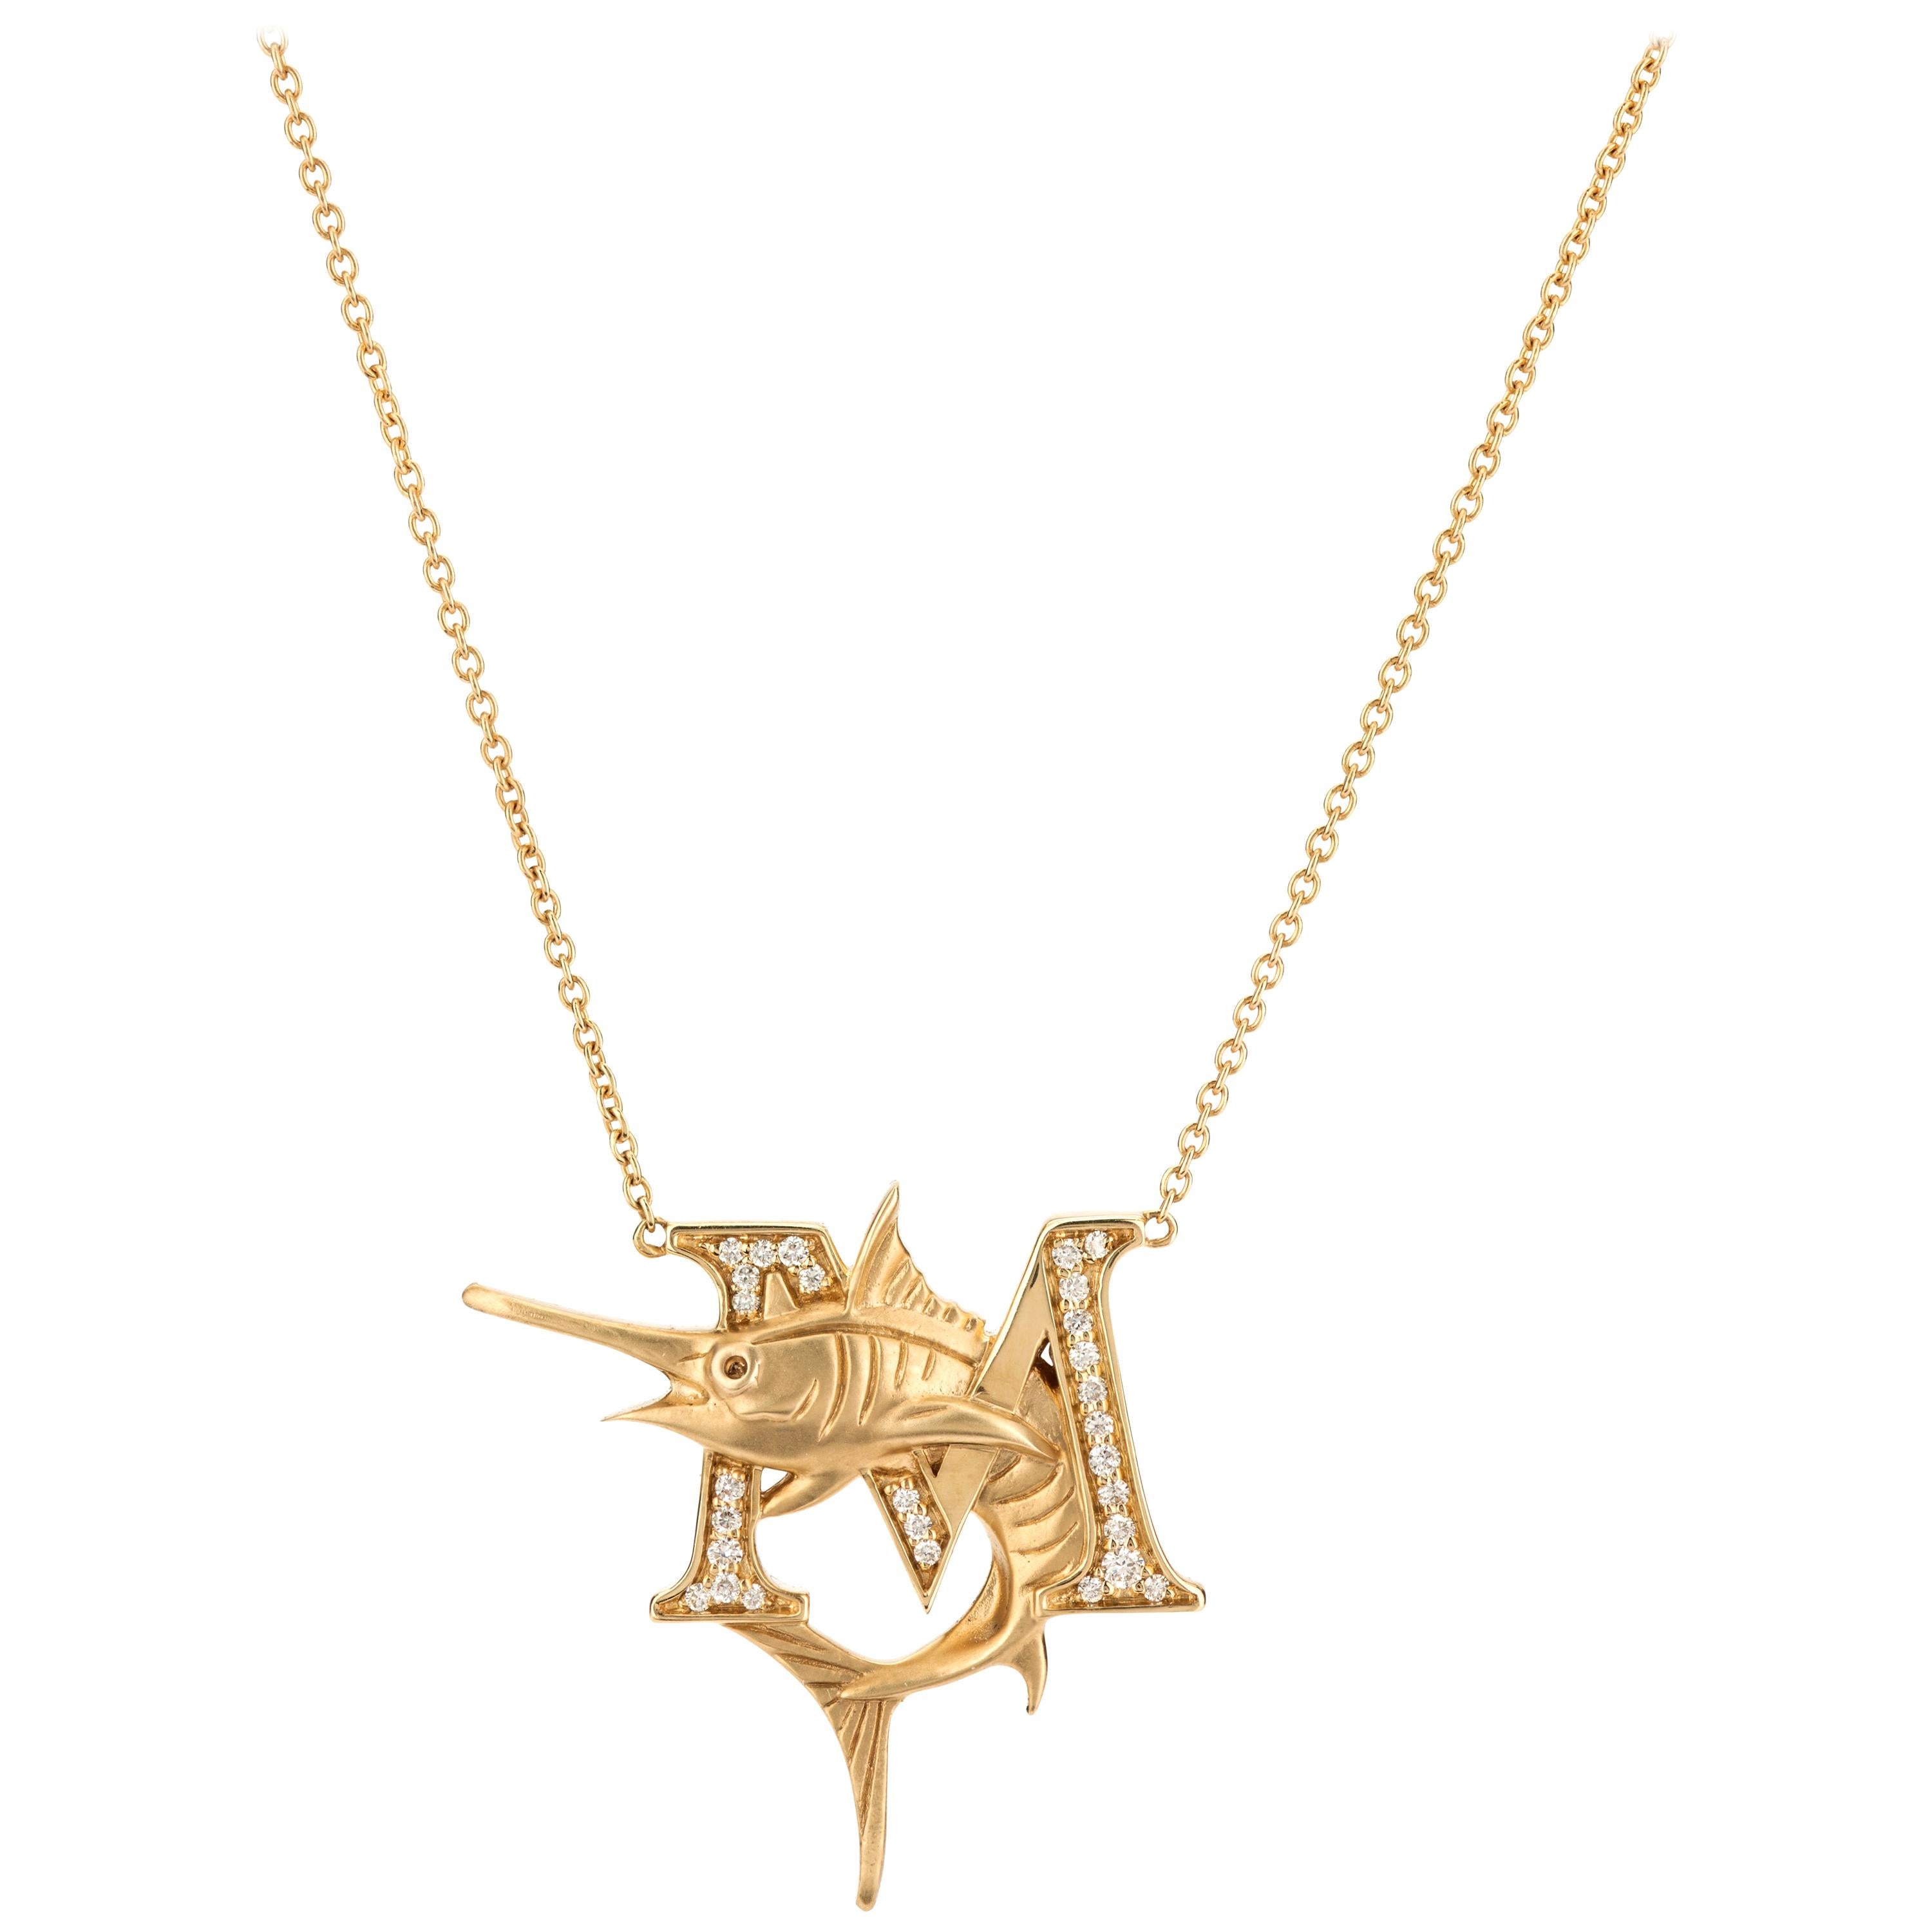 Stephen Webster Fish Tales M is for Marlin 18K Gold and White Diamond Necklace